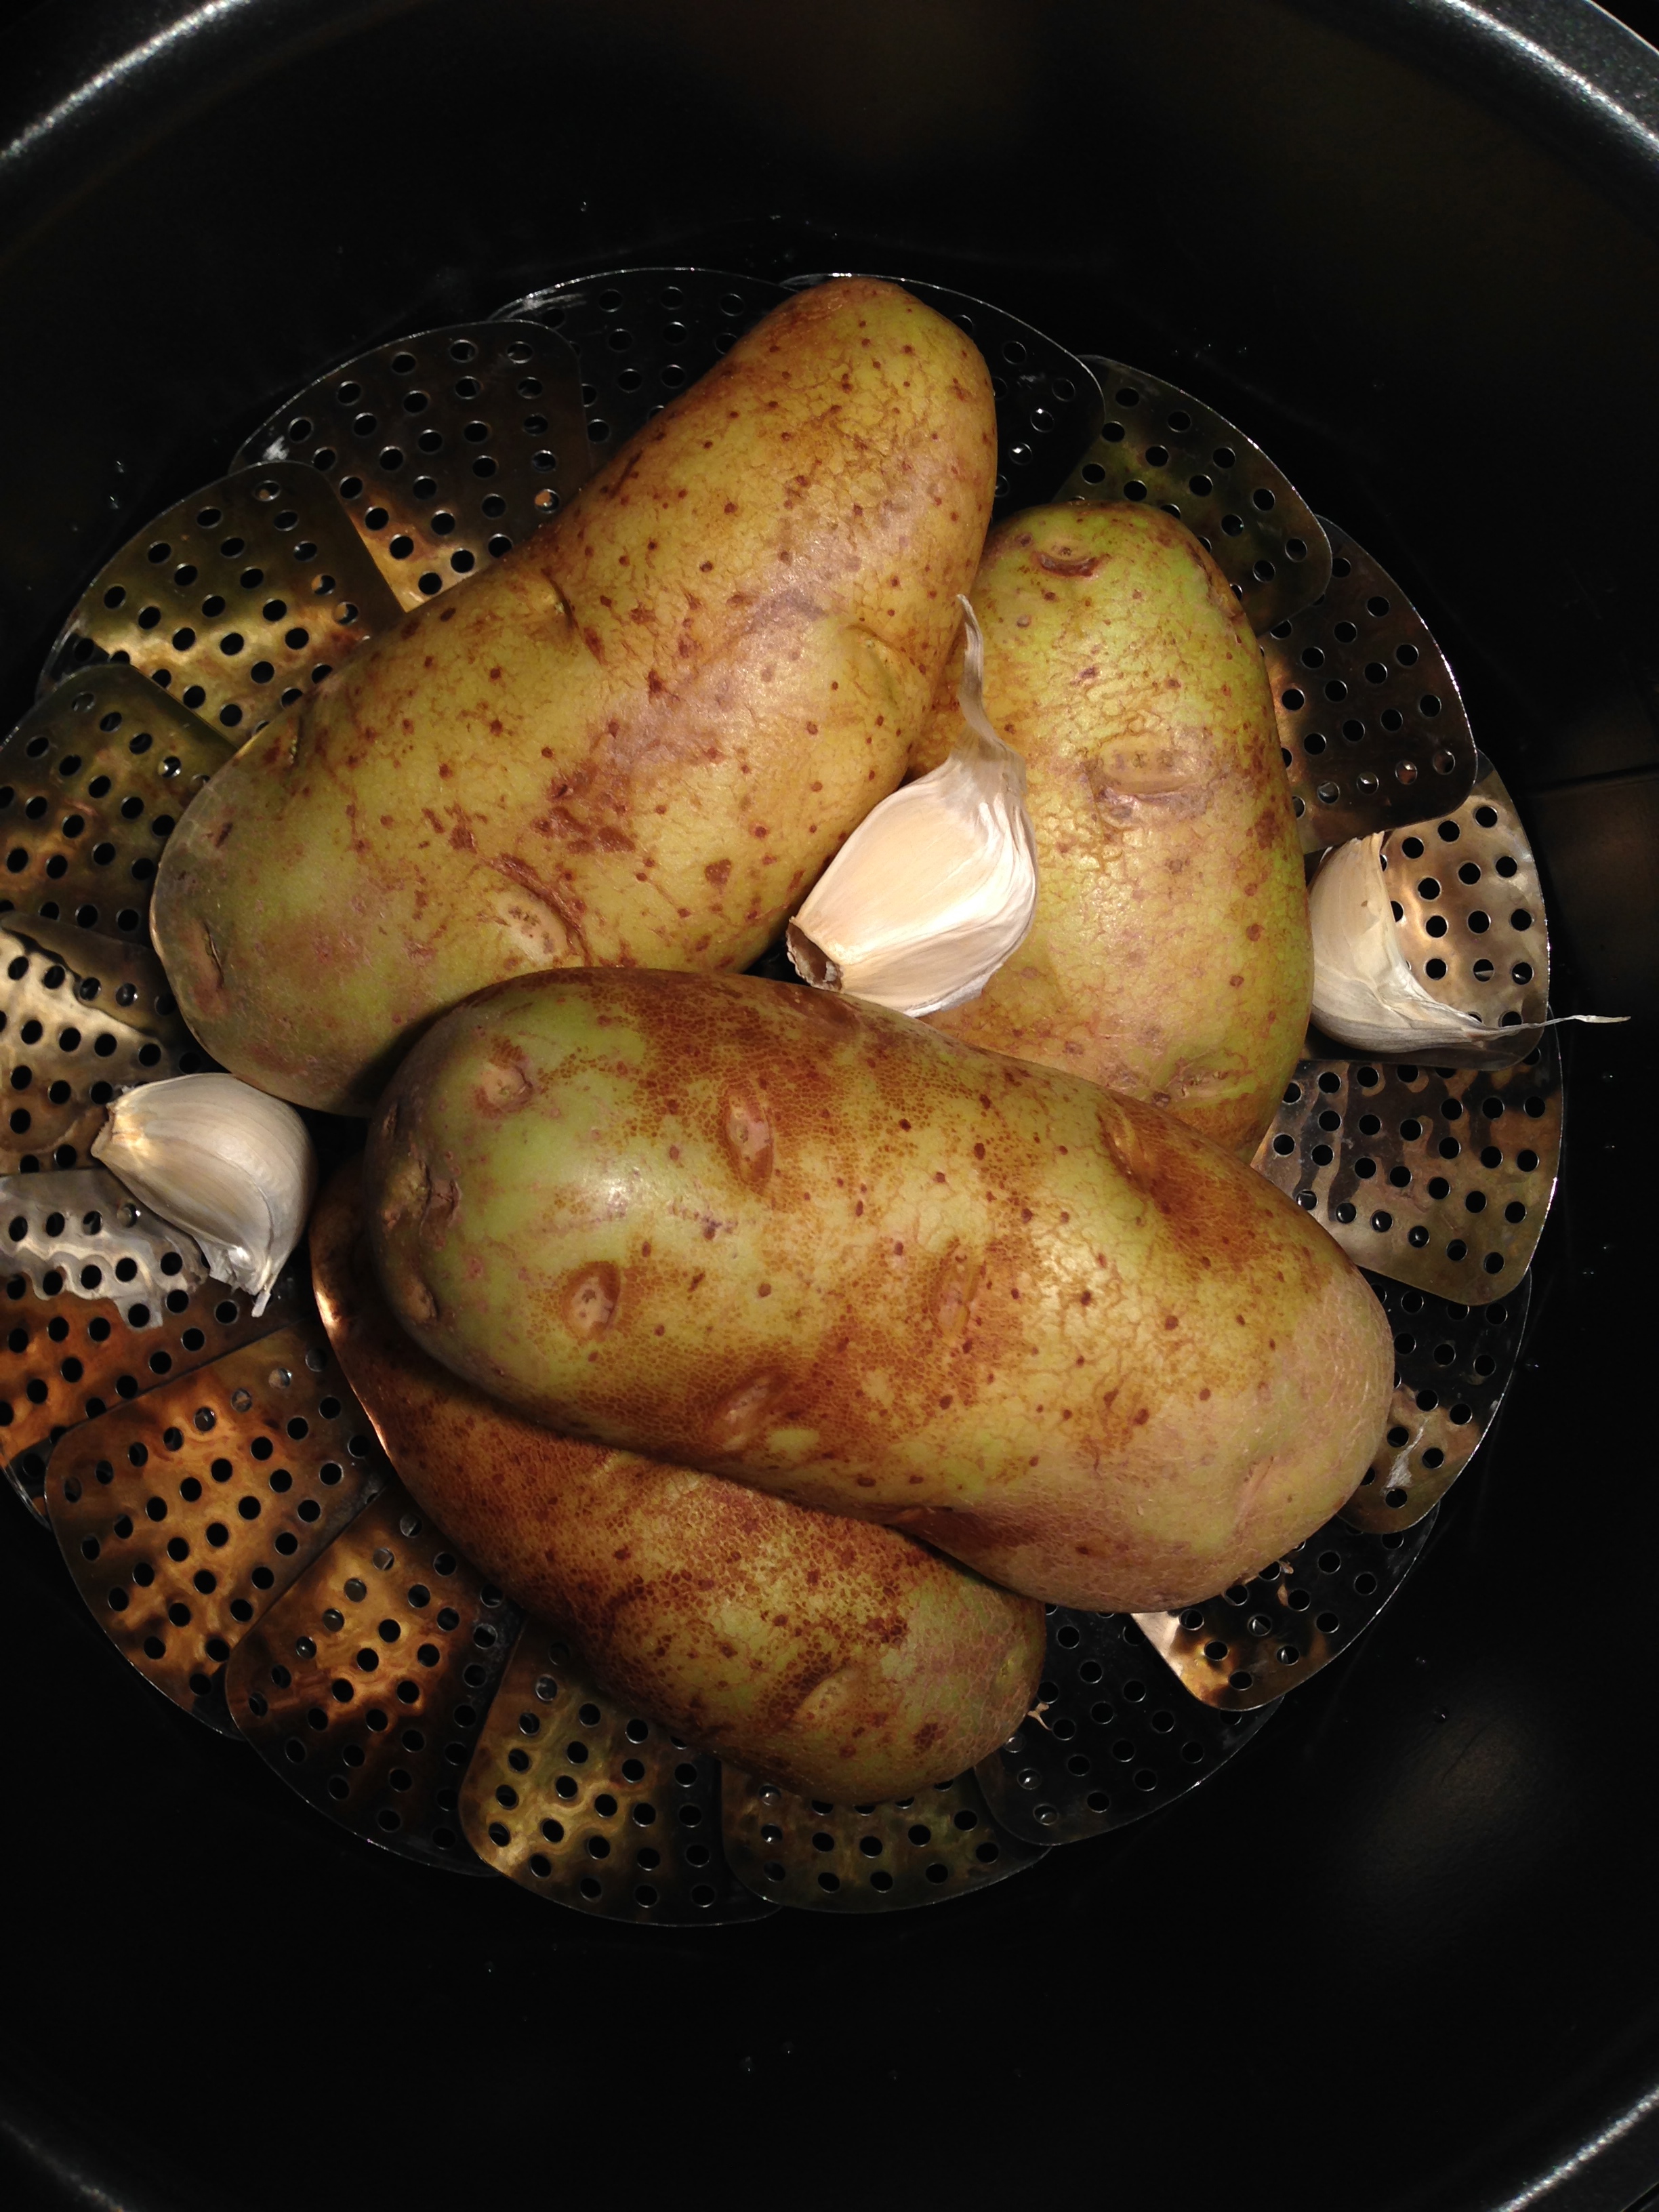 How to Cook Baked Potatoes in the Electric Pressure Cooker